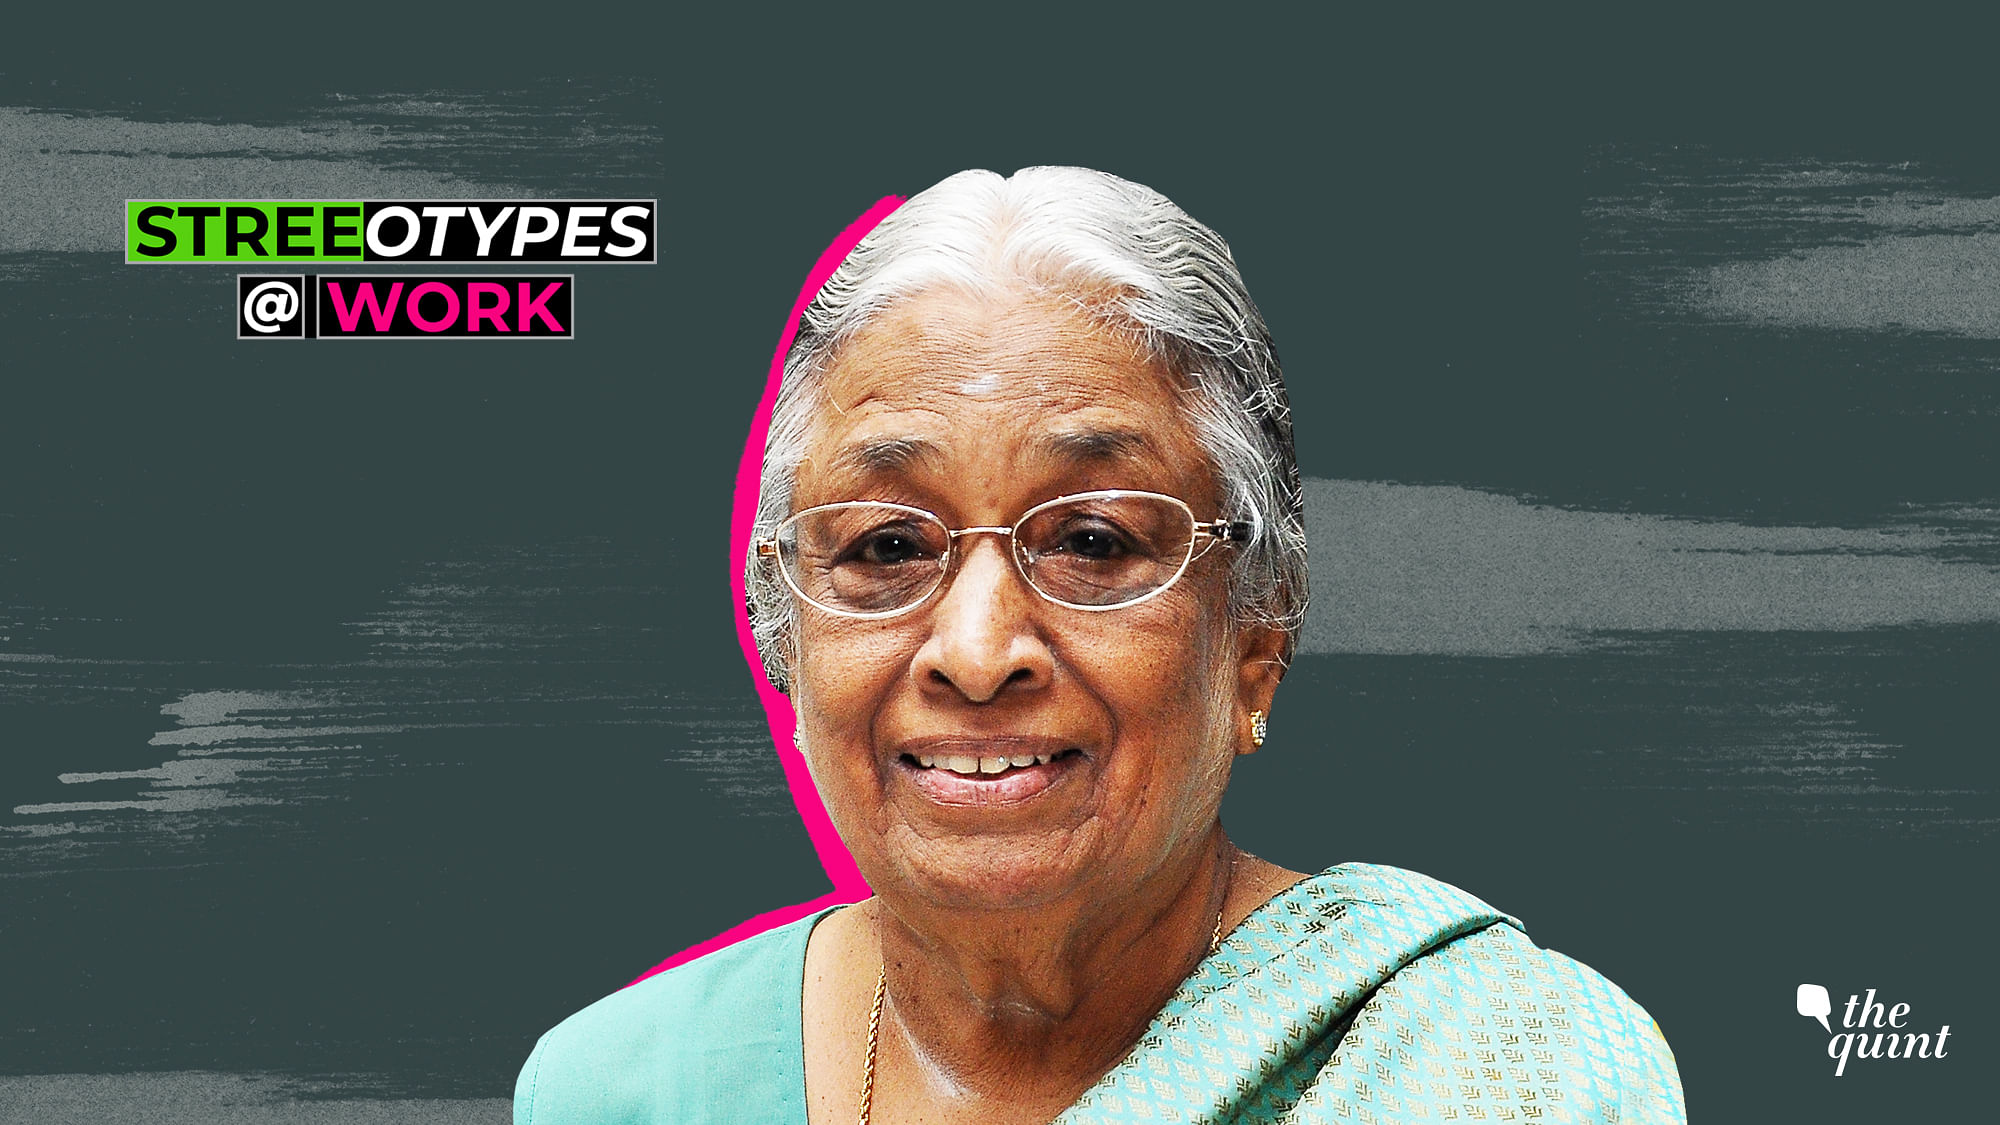 Meenkashi Meyappan has been bending and breaking stereotypes for decades now.